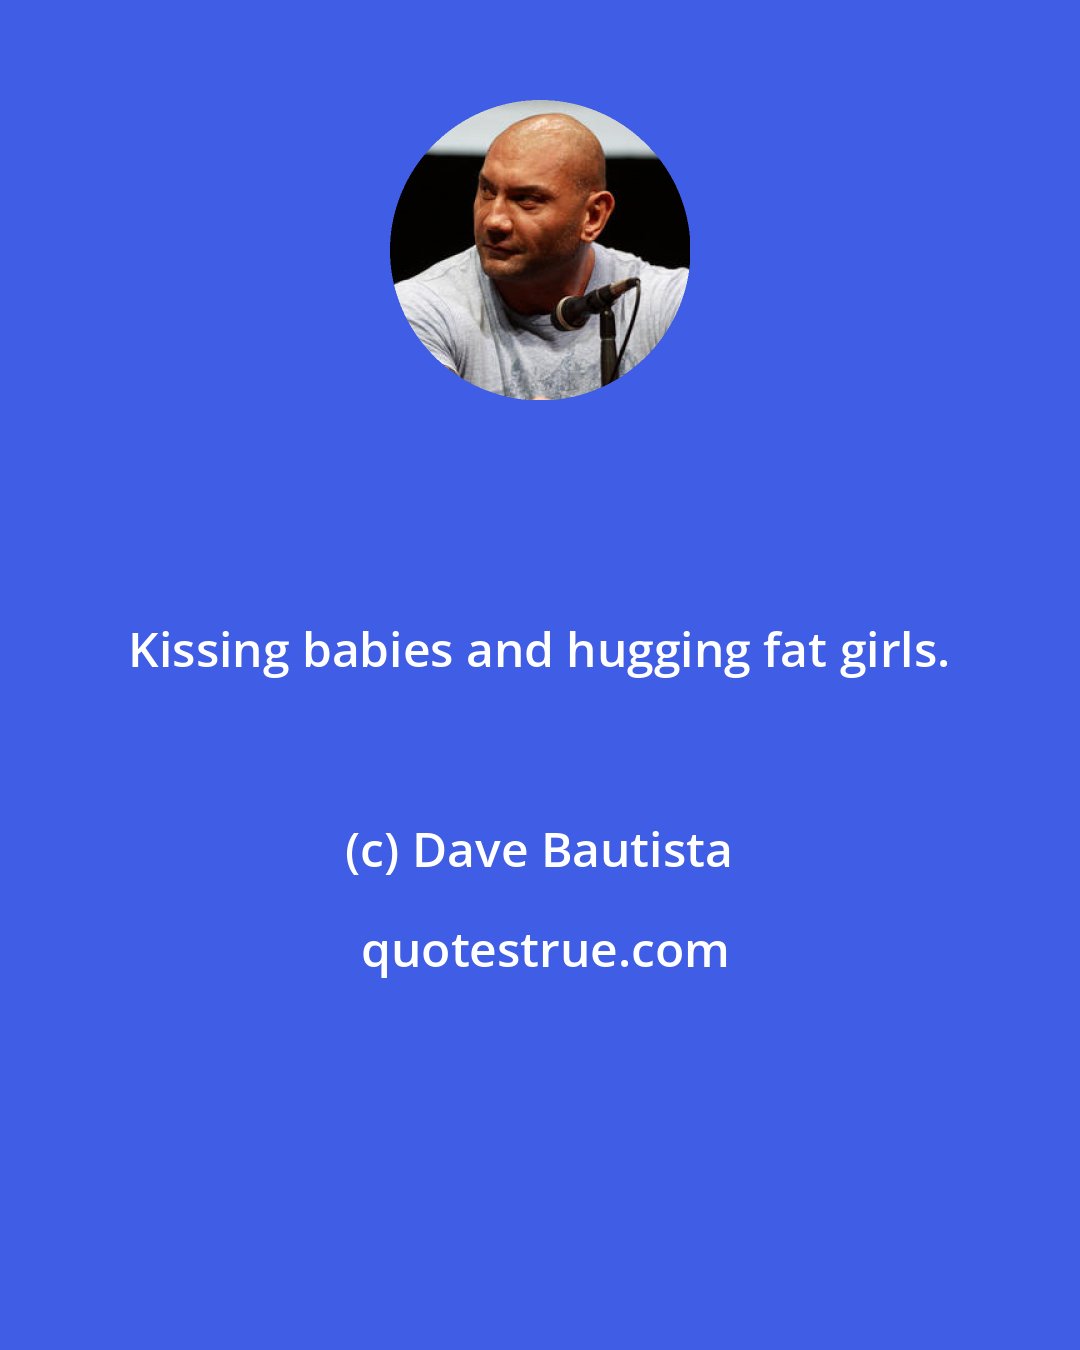 Dave Bautista: Kissing babies and hugging fat girls.